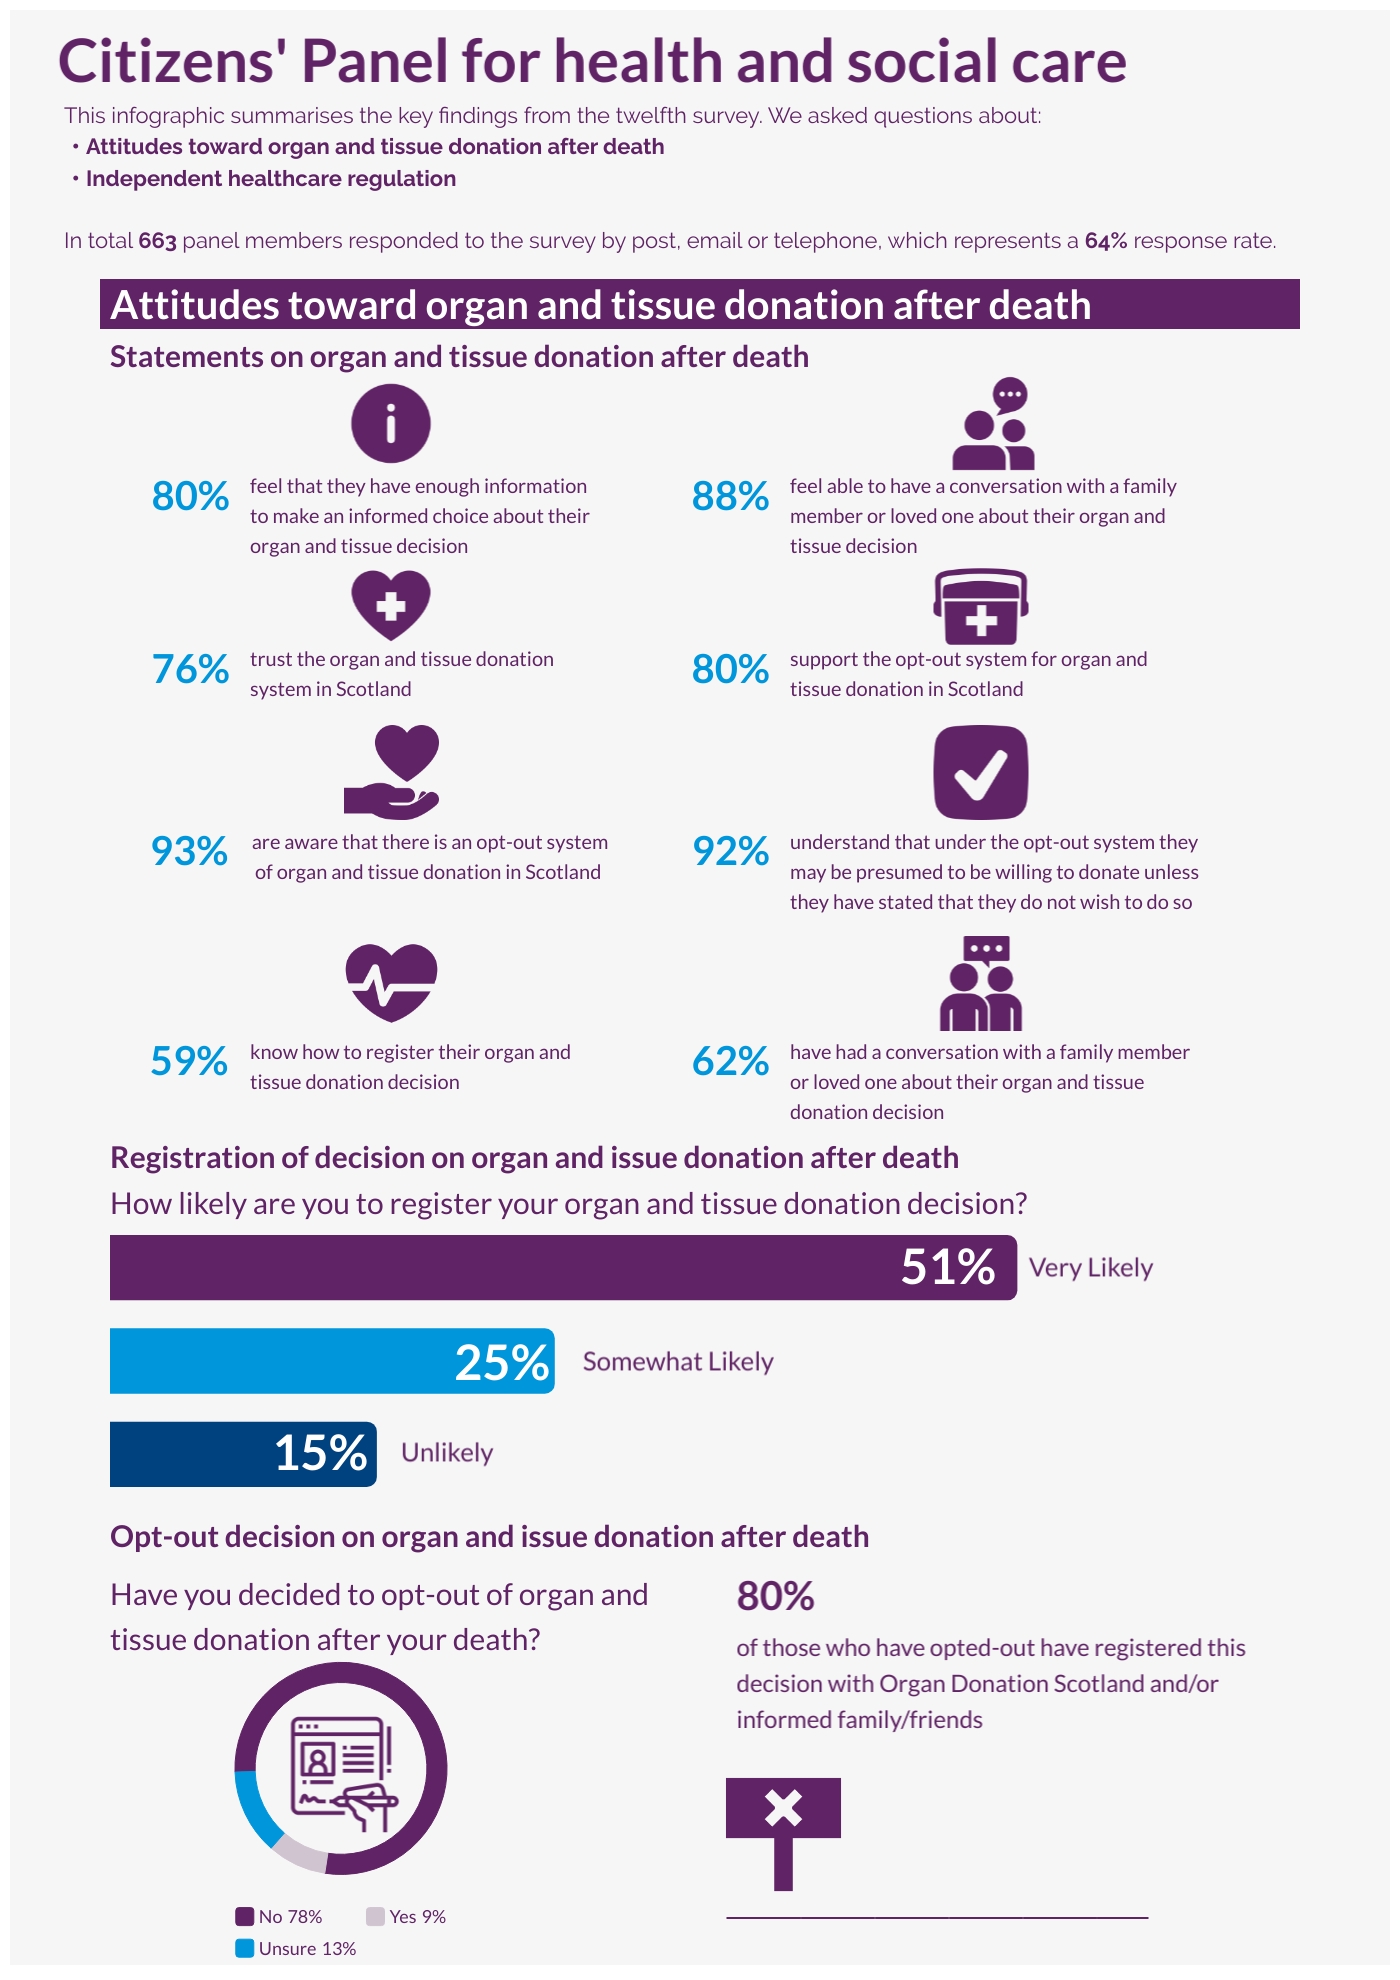 This infographic outlines the topics and response rate for Citizens' Panel 12. Then it describes key findings from the organ and tissue donation topic. All this information is outlined fully on the webpage text and in the report.